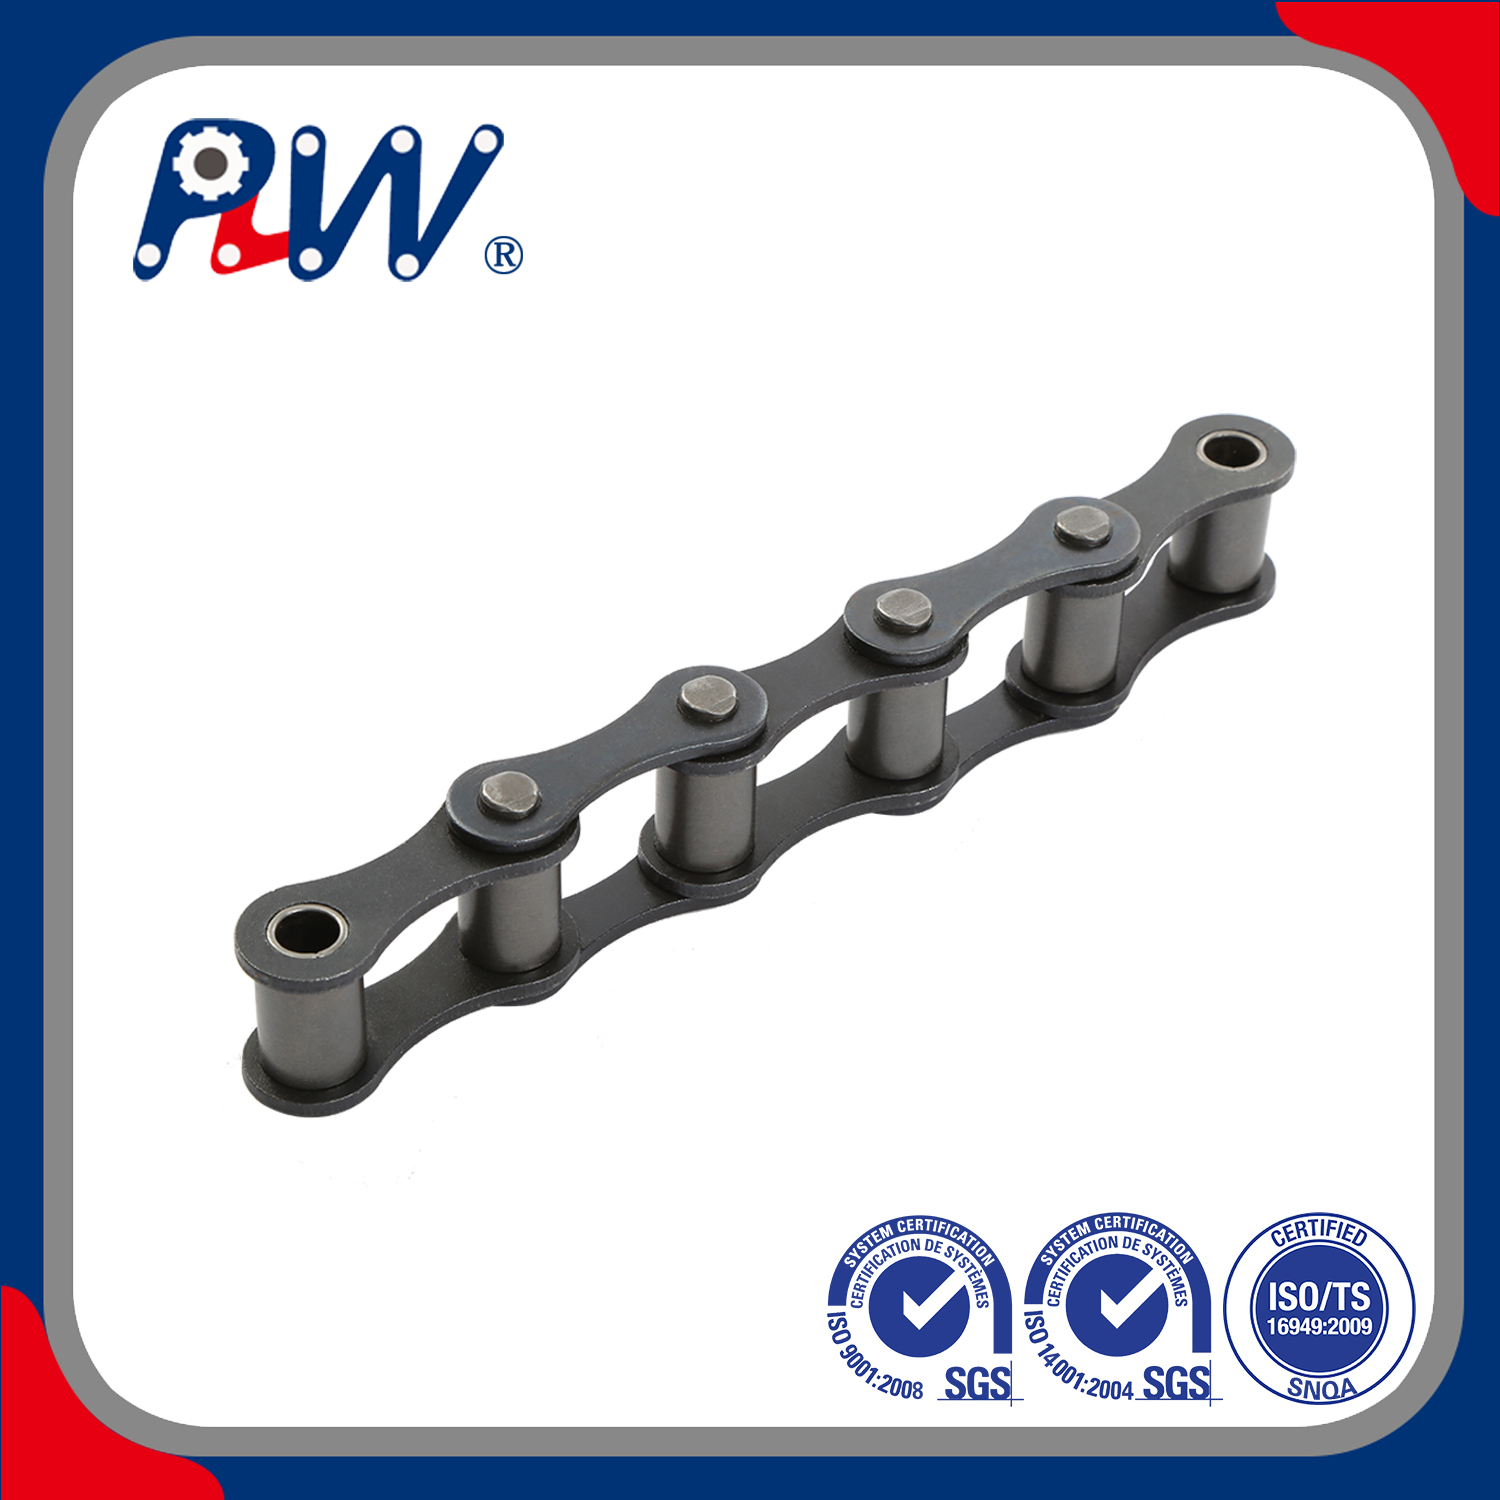 A Type Steel Agriculture Conveyor Roller Chain with High Quality